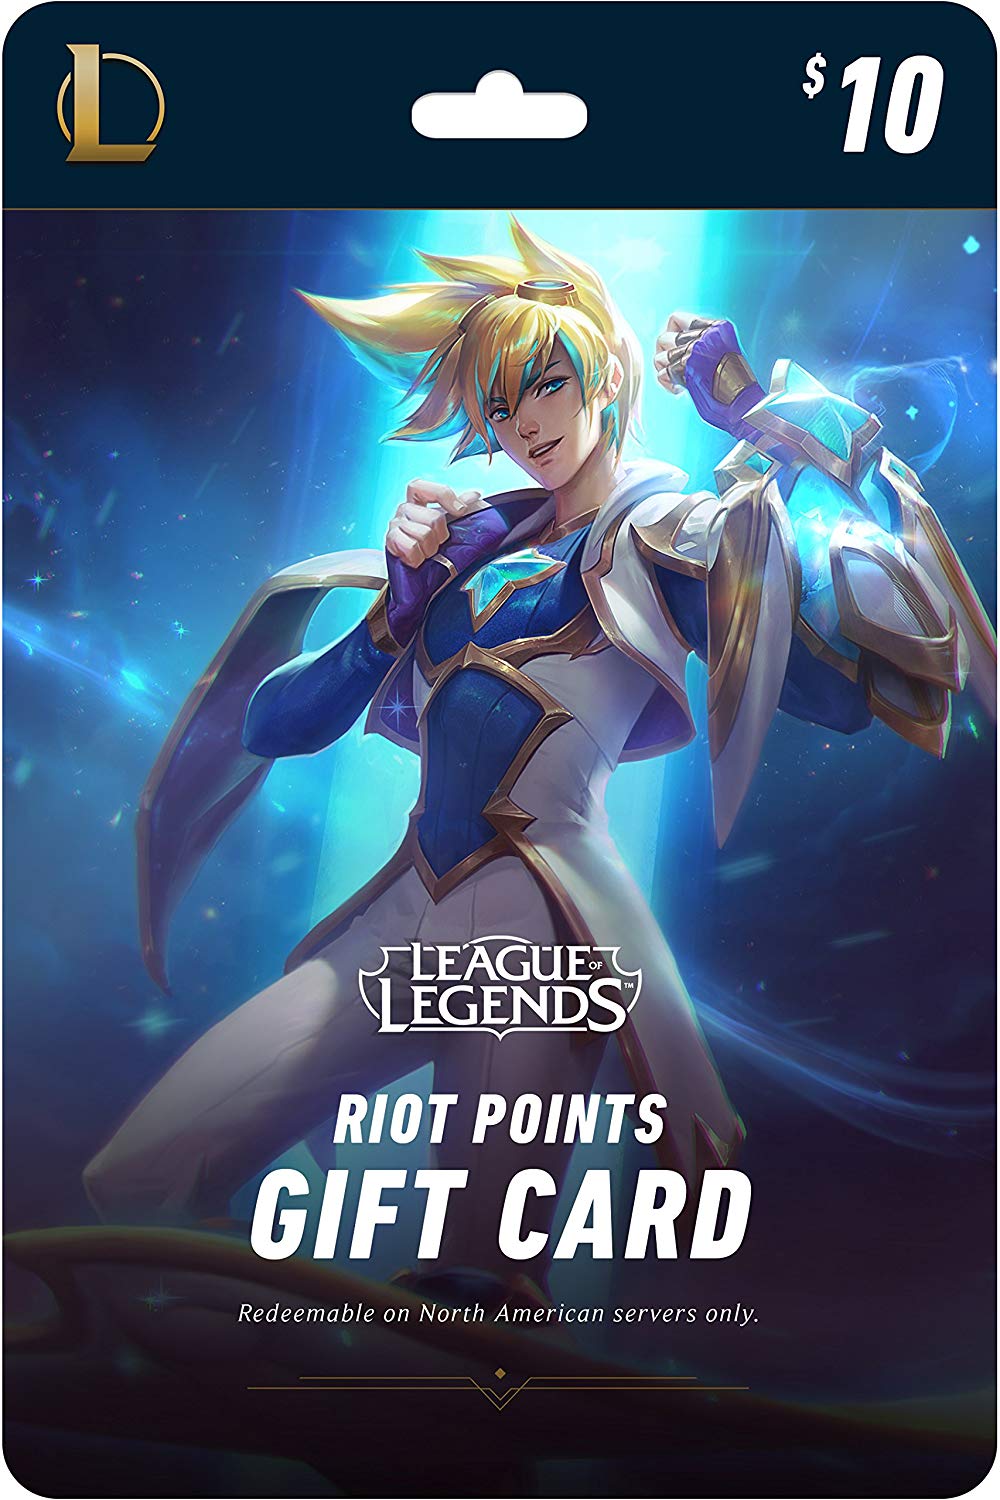 Buy League of Legends $10 Card 1380 Riot Points NA only ...